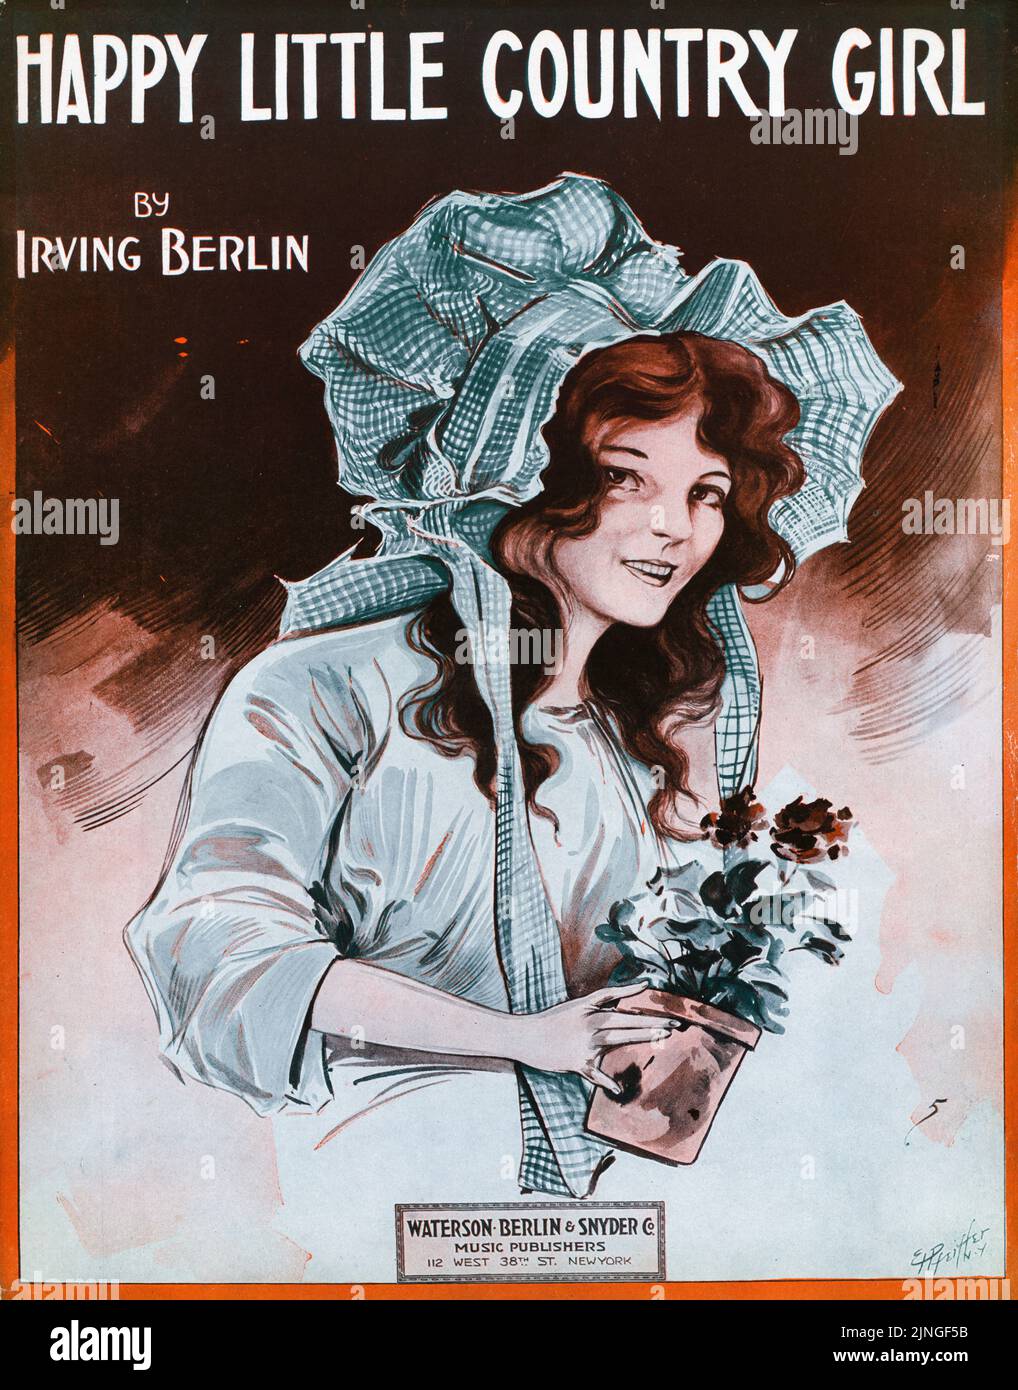 Happy little country girl (1913) by Irving Berlin, Published by Waterson, Berlin and Snyder Company. Sheet music cover. Illustration by Edward H. Pfeiffer Stock Photo